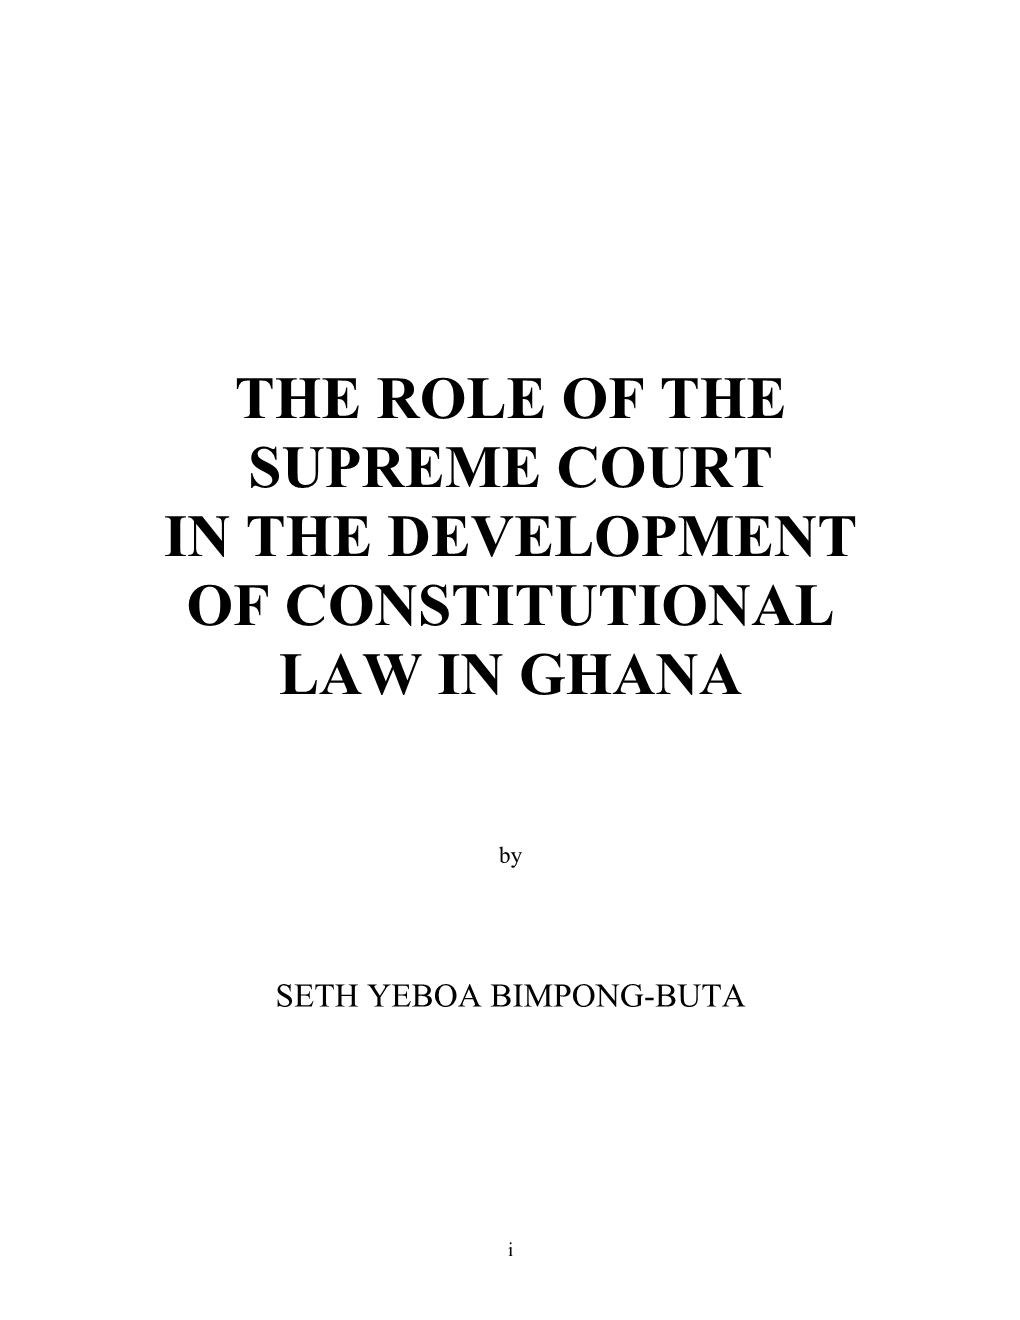 The Role of the Supreme Court in the Development of Constitutional Law in Ghana